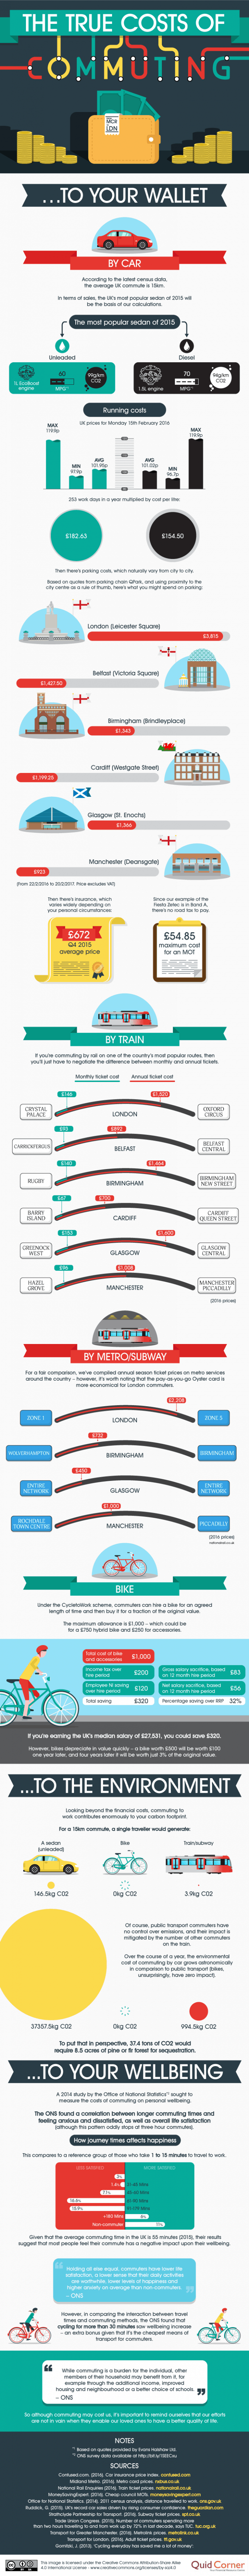 Infographic about the cost of different methods of commuting